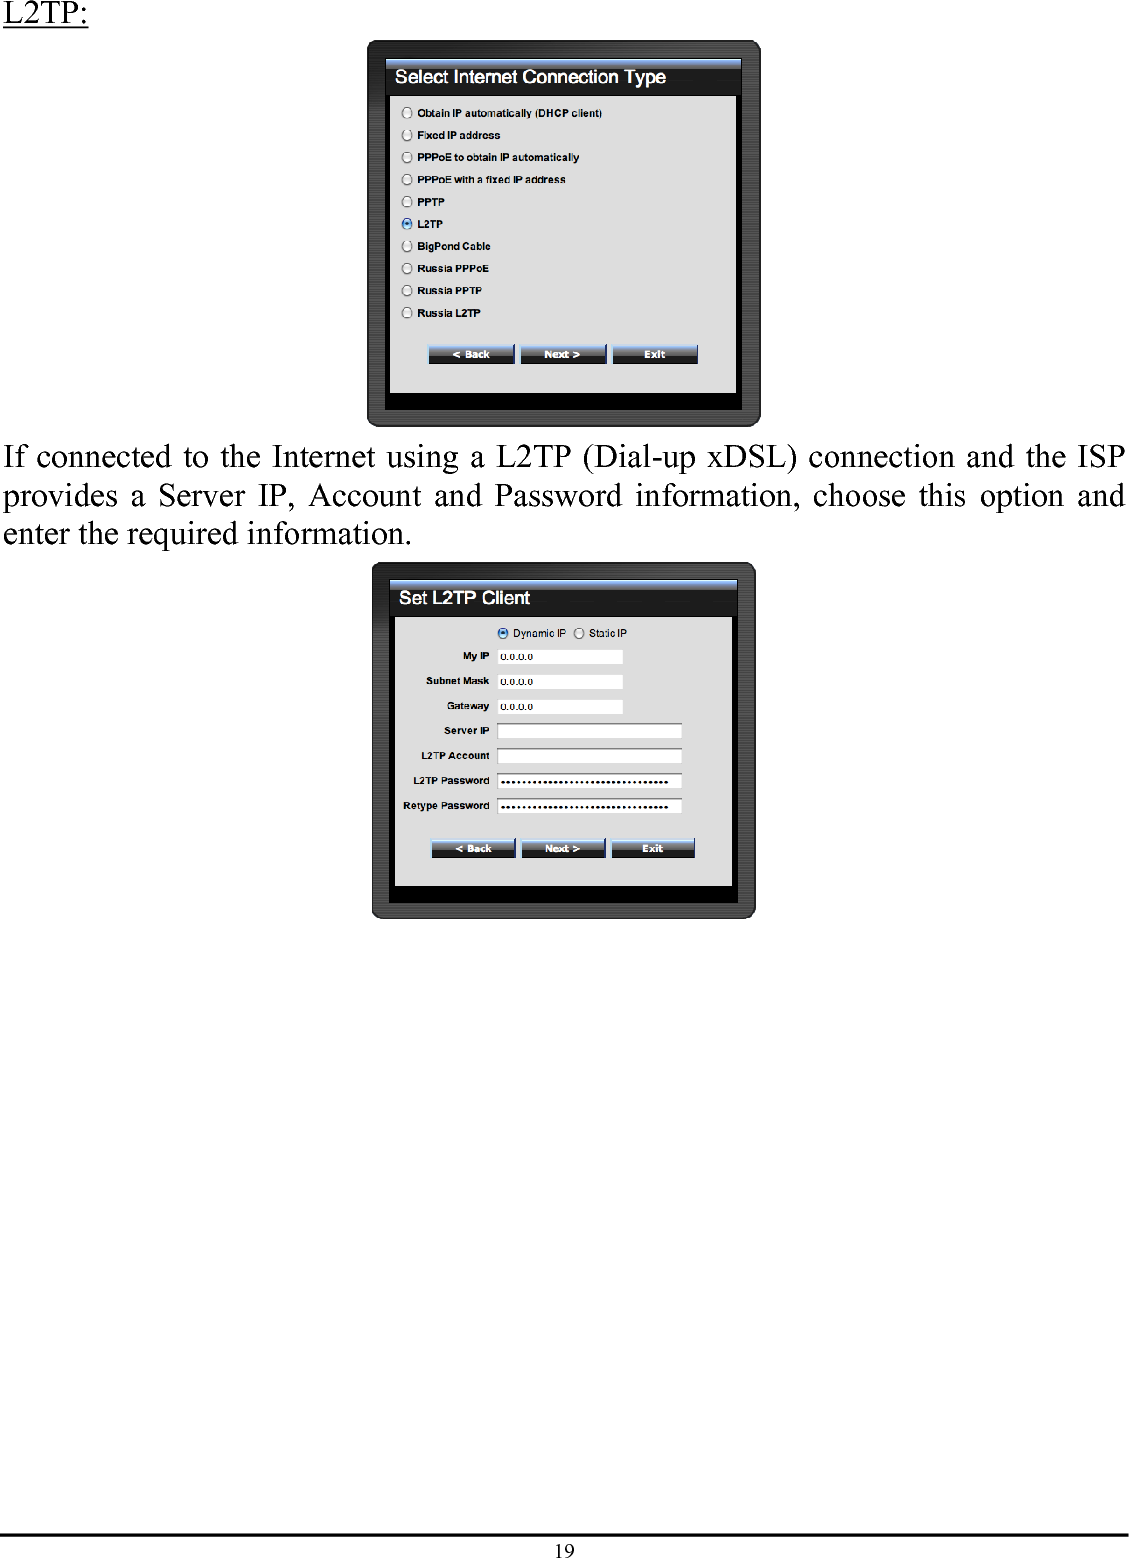 19 L2TP:  If connected to the Internet using a L2TP (Dial-up xDSL) connection and the ISP provides a Server IP, Account and Password information, choose this option and enter the required information.  